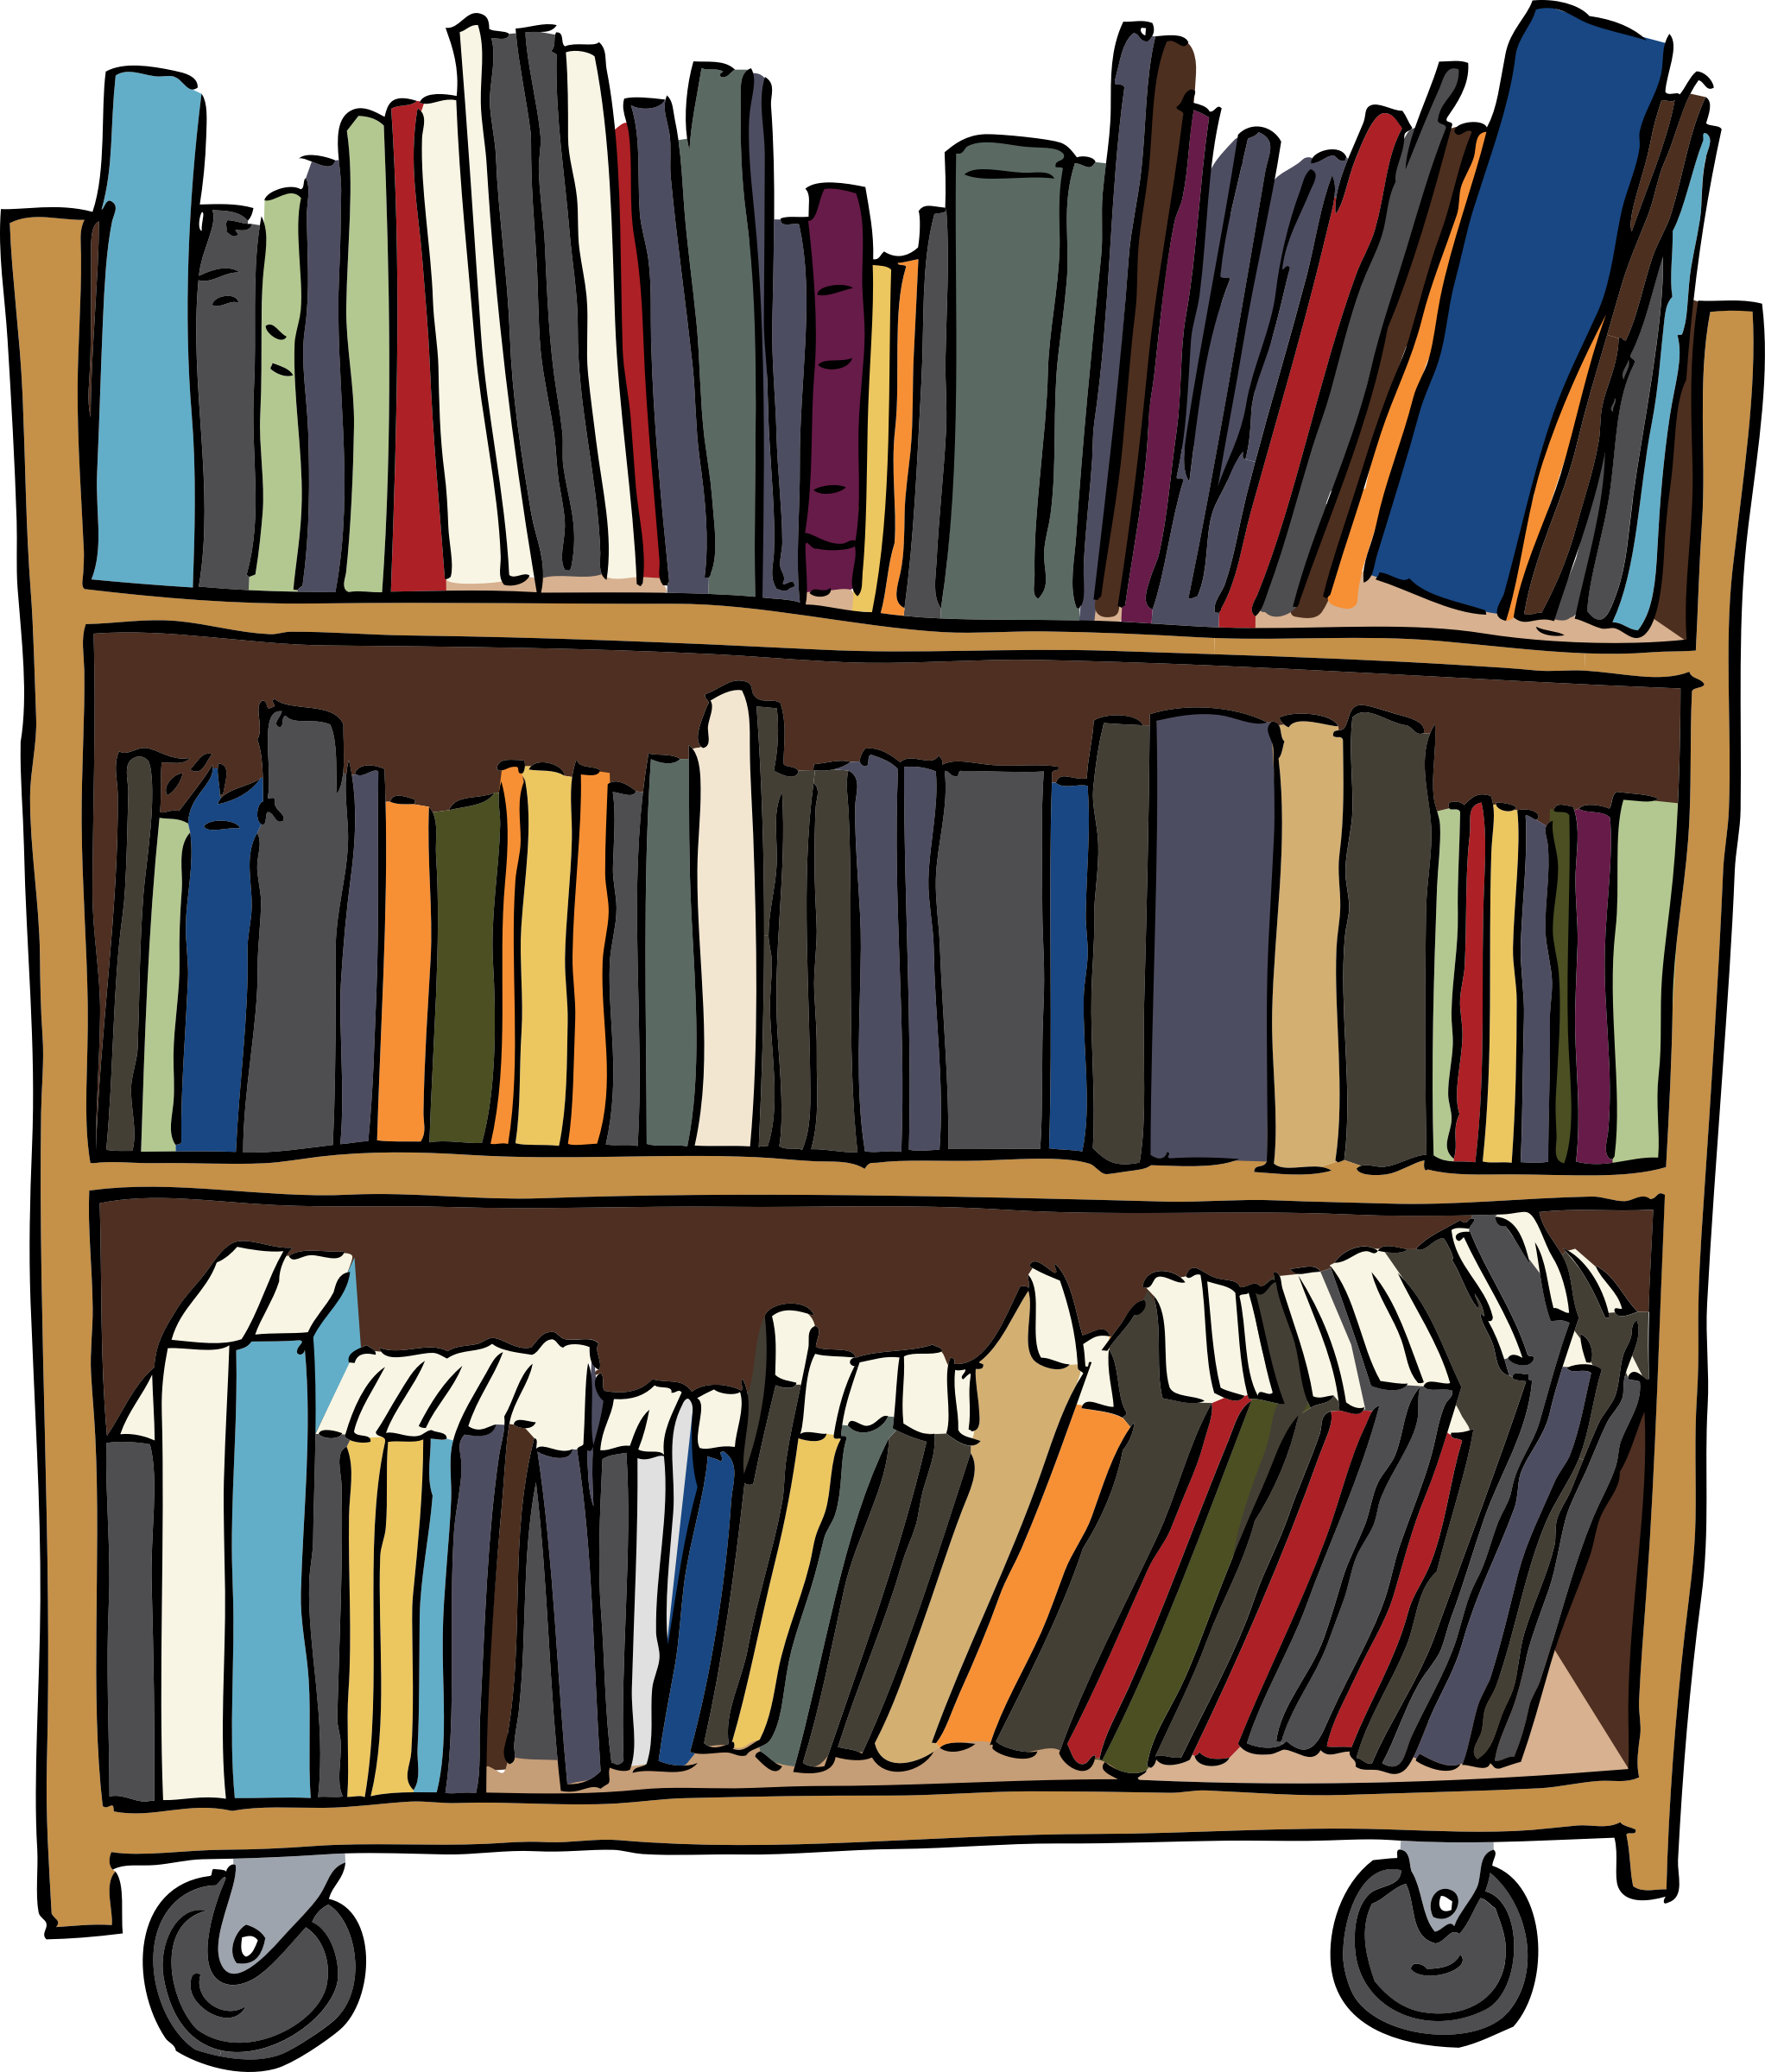 Cartoon image of a library book cart.